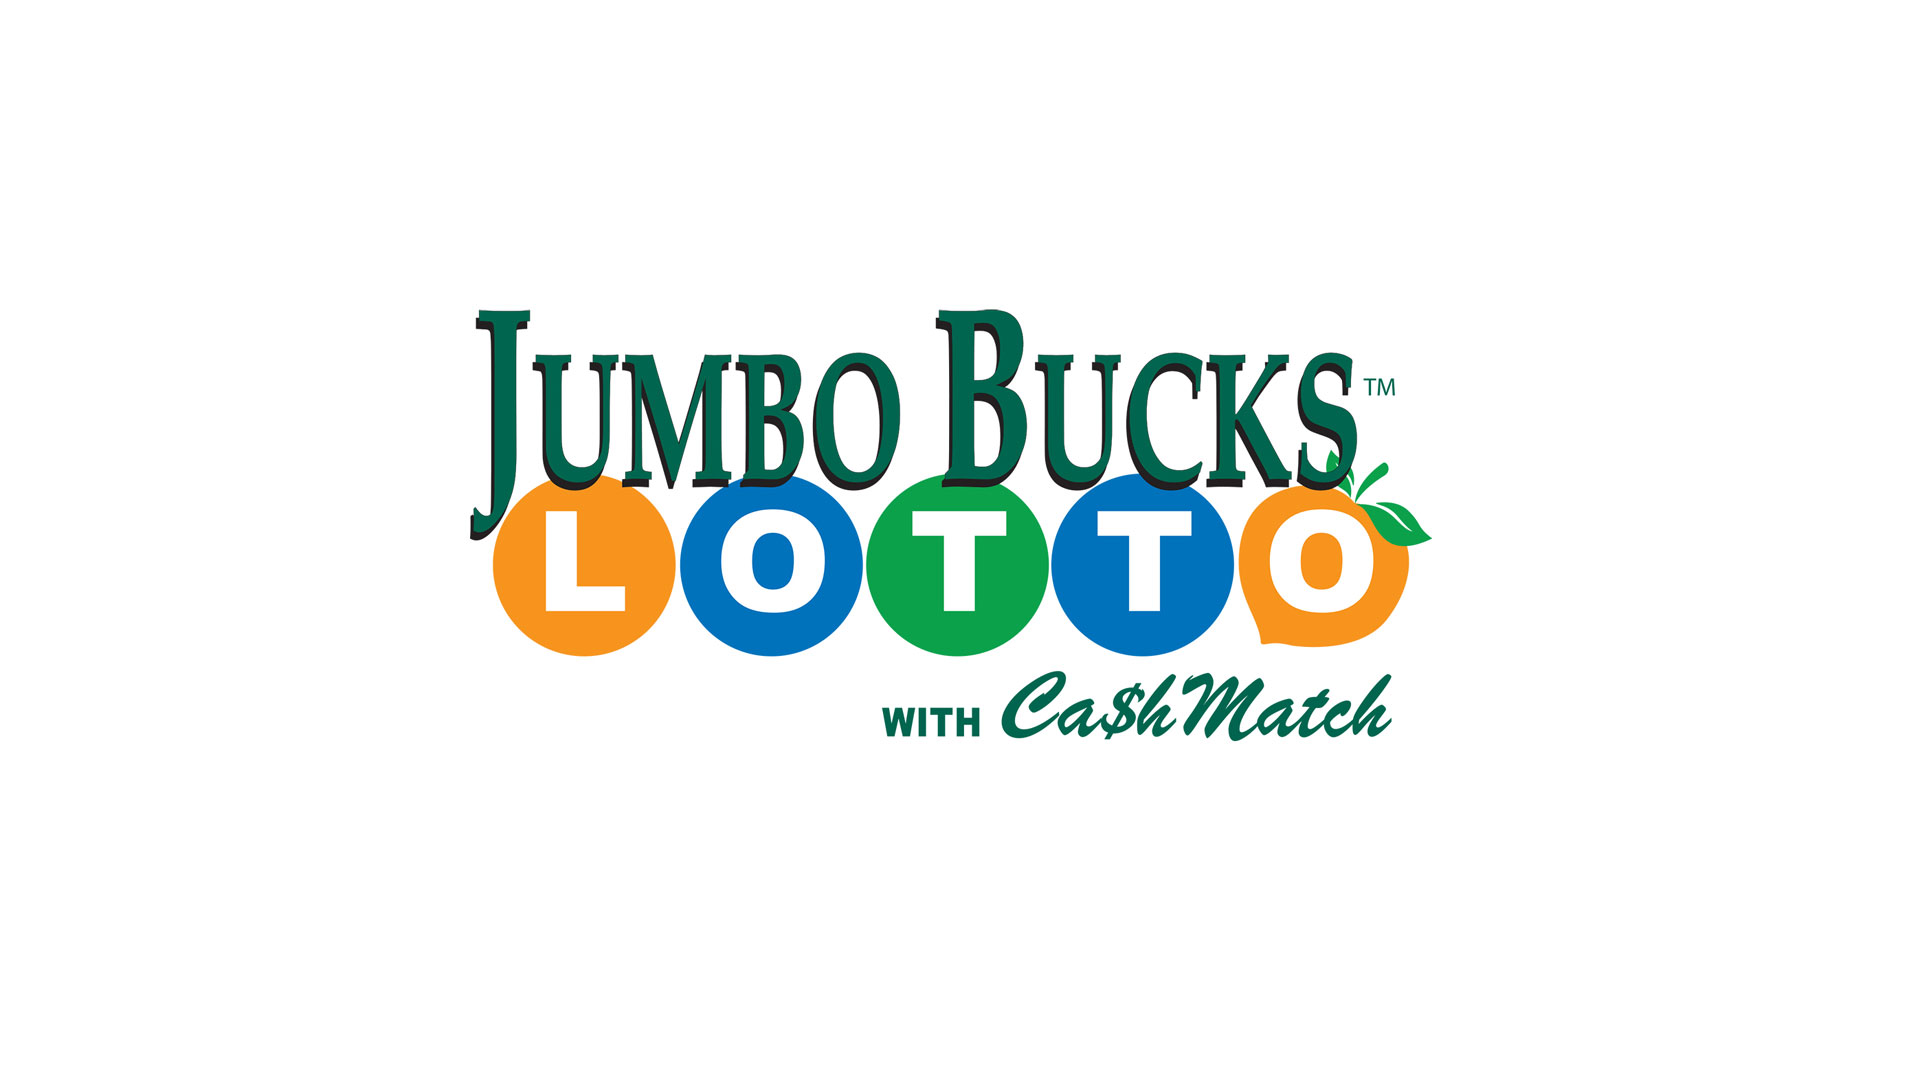 Lottery launches Jumbo Bucks Lotto with Cah Match